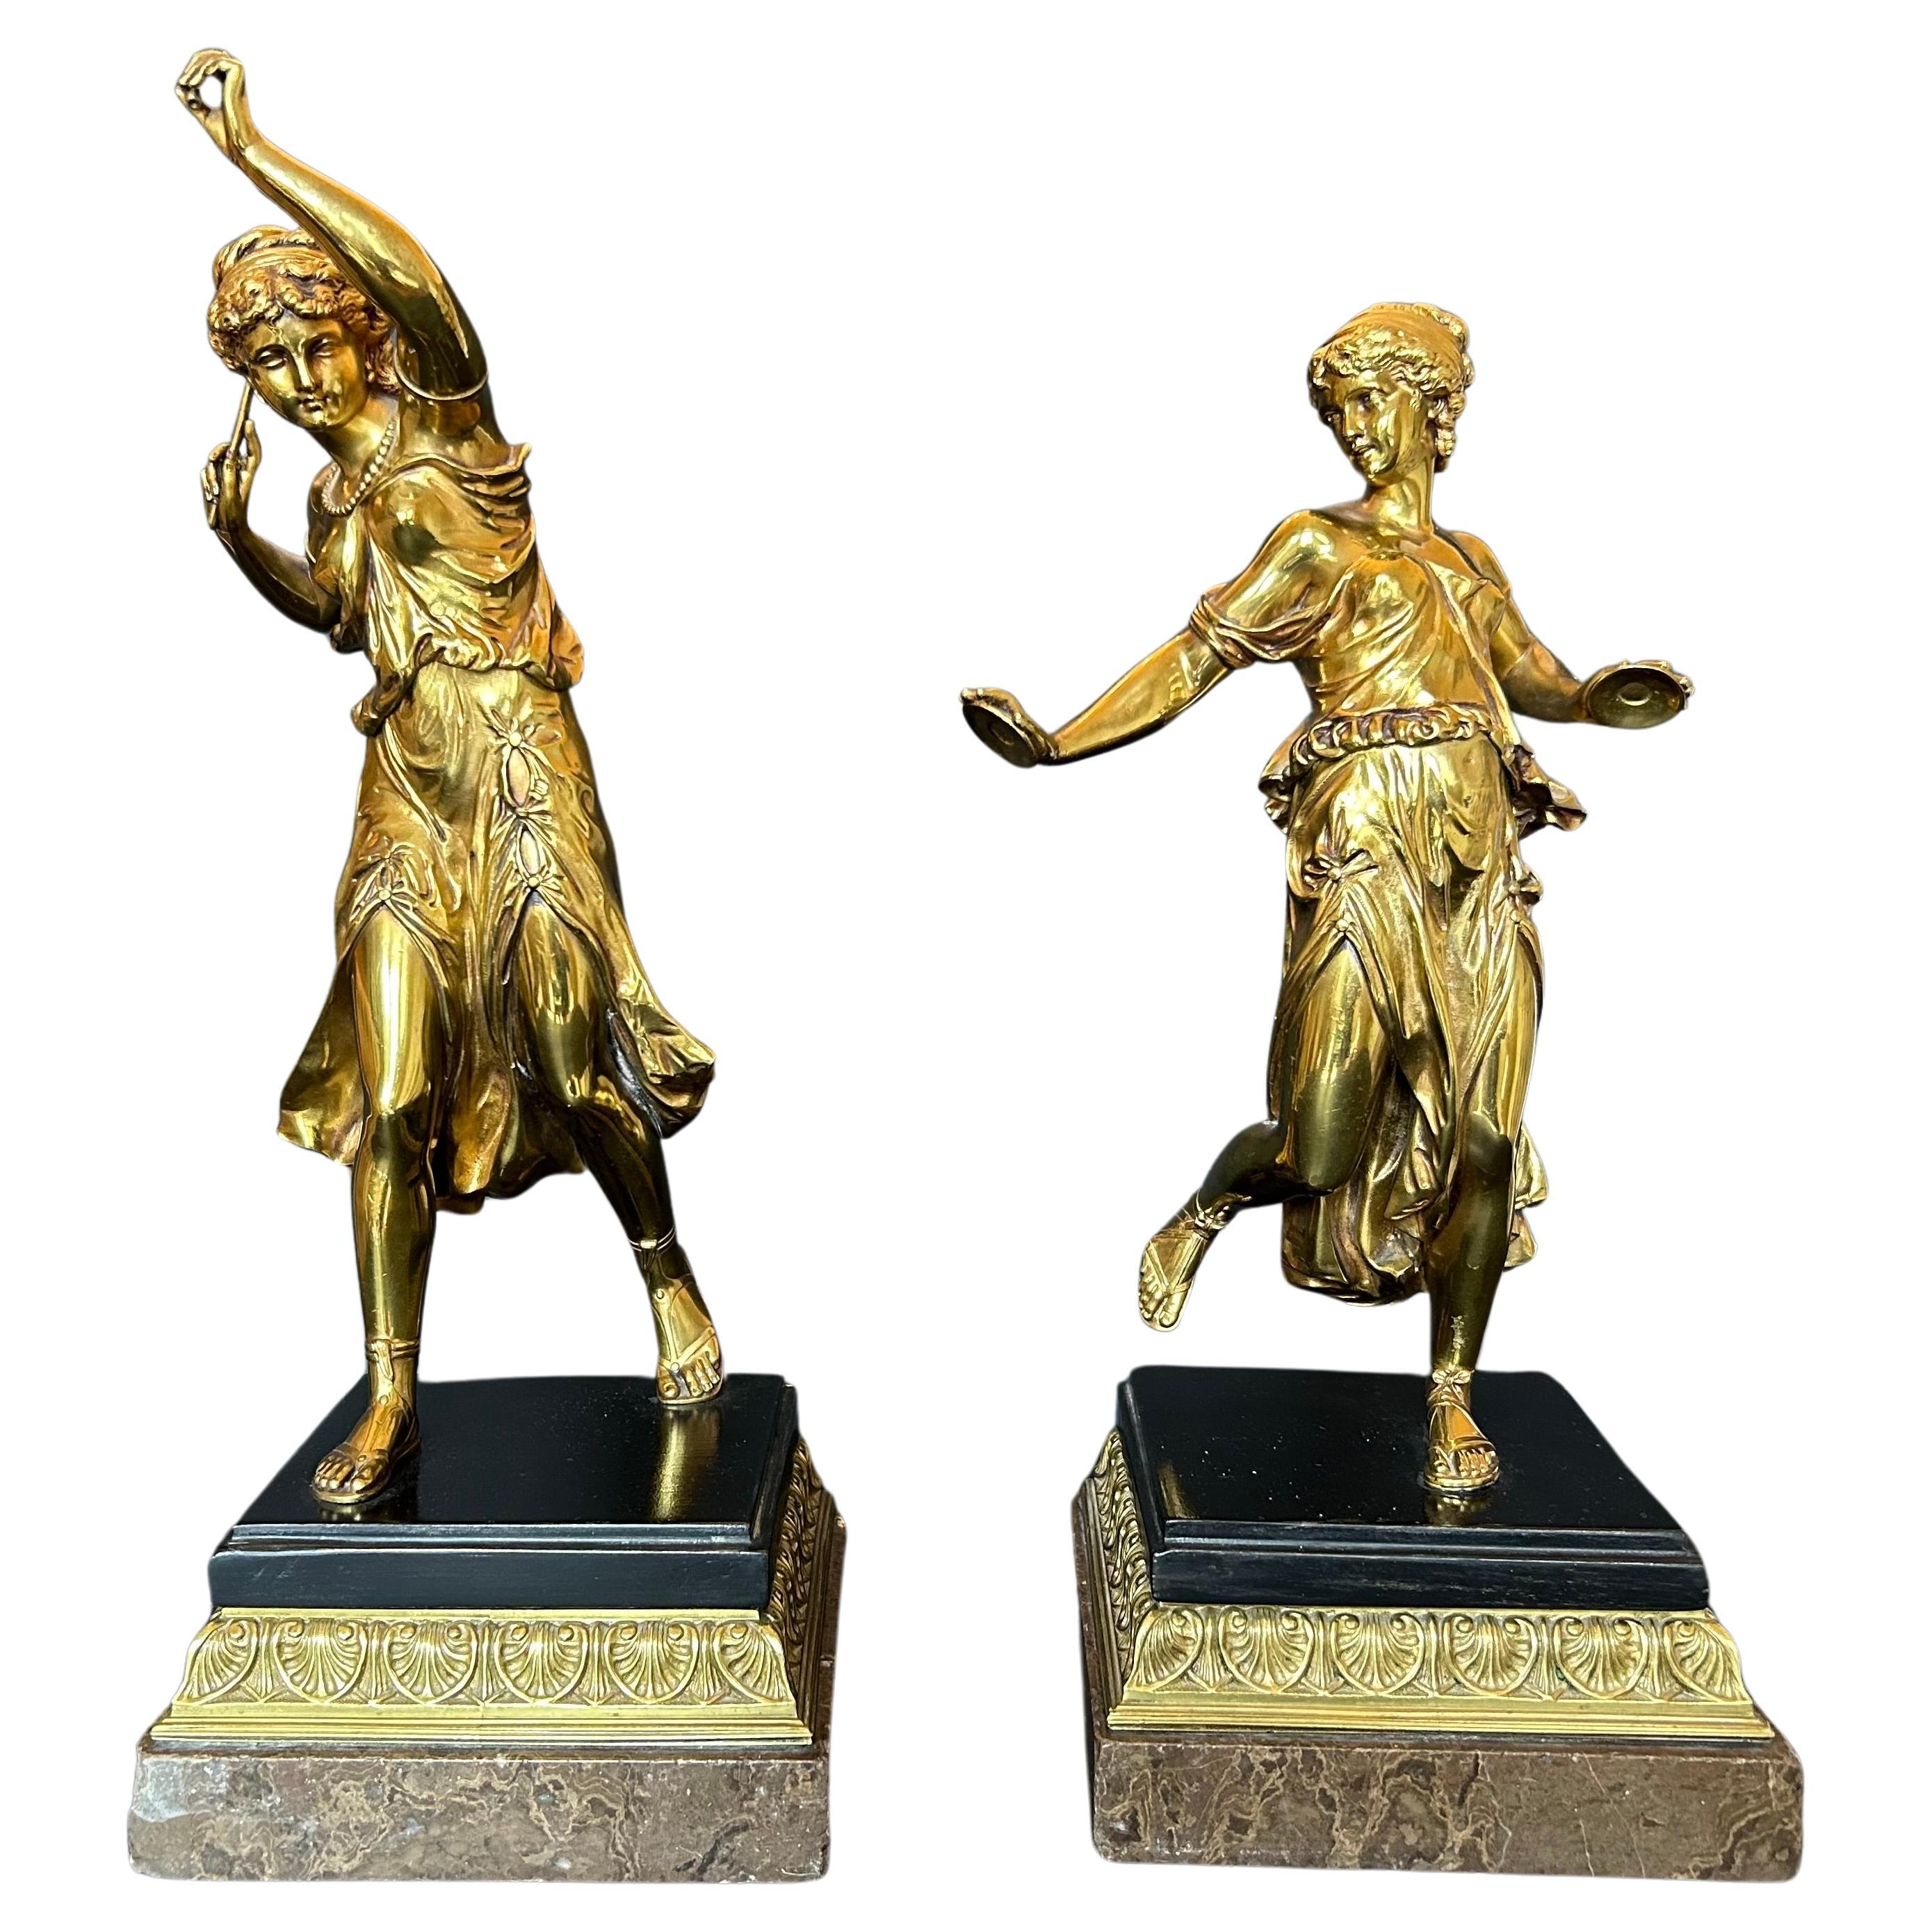 A wonderful pair of gilt bronze sculptures depicting two dancers in the classical greek style, one holding cymbals and the other a baton. Each on a tiered marble base with acanthus gilt bronze detailing. Early twentieth century, probably French or